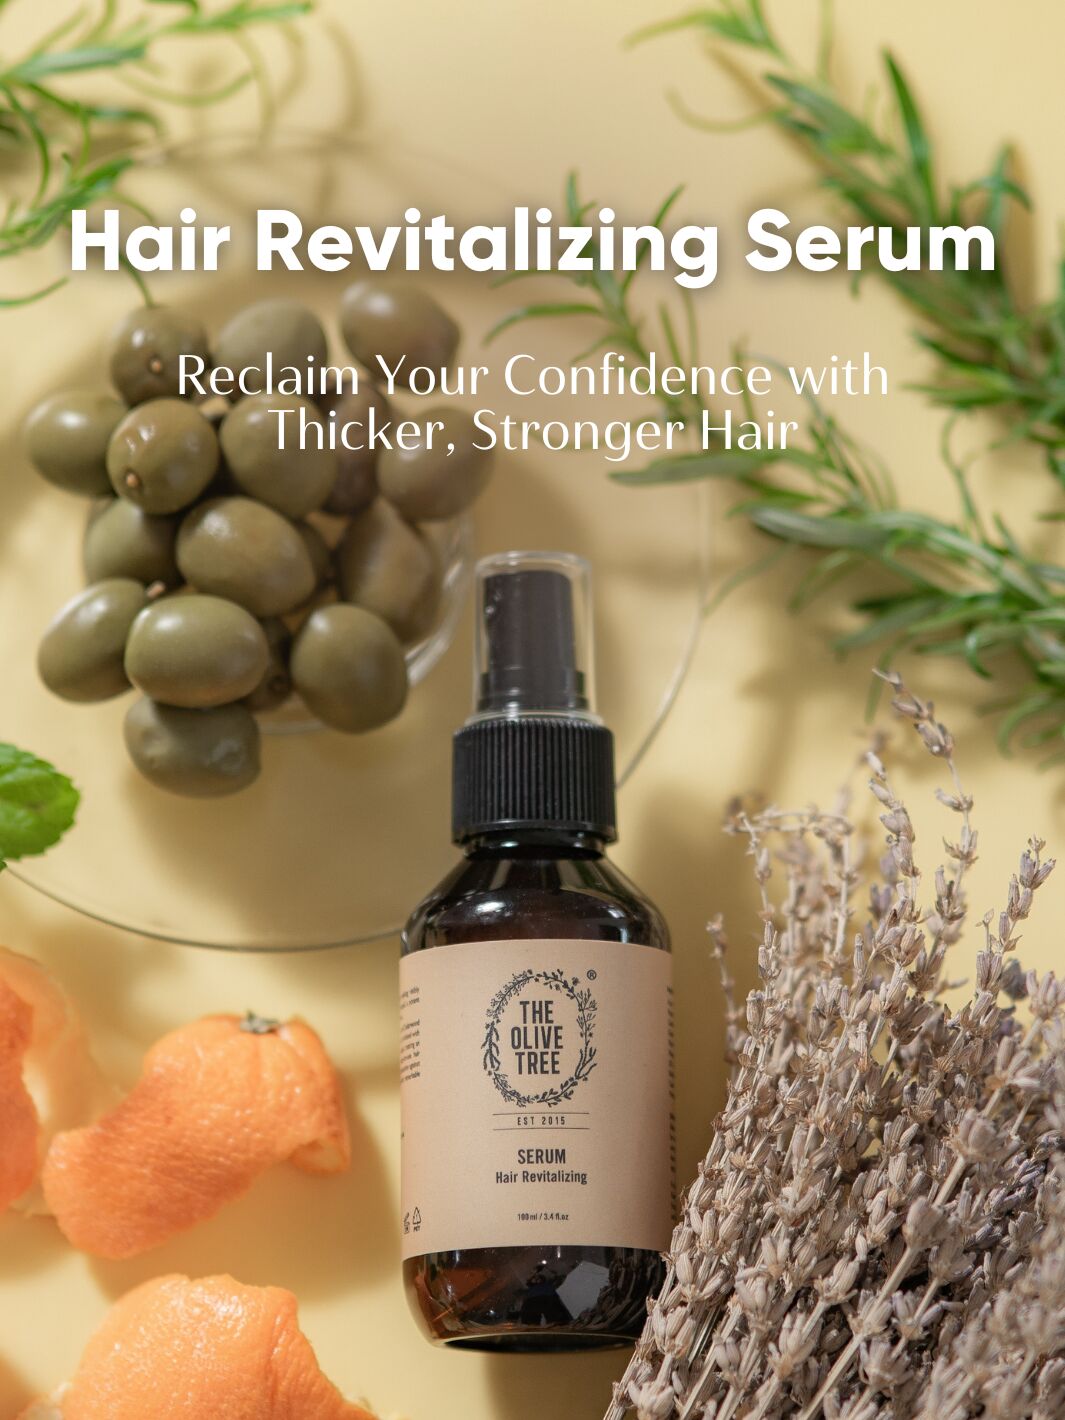 Reclaim Your Confidence With Thicker & Stronger Hair with Our Hair Revitalizing Serum